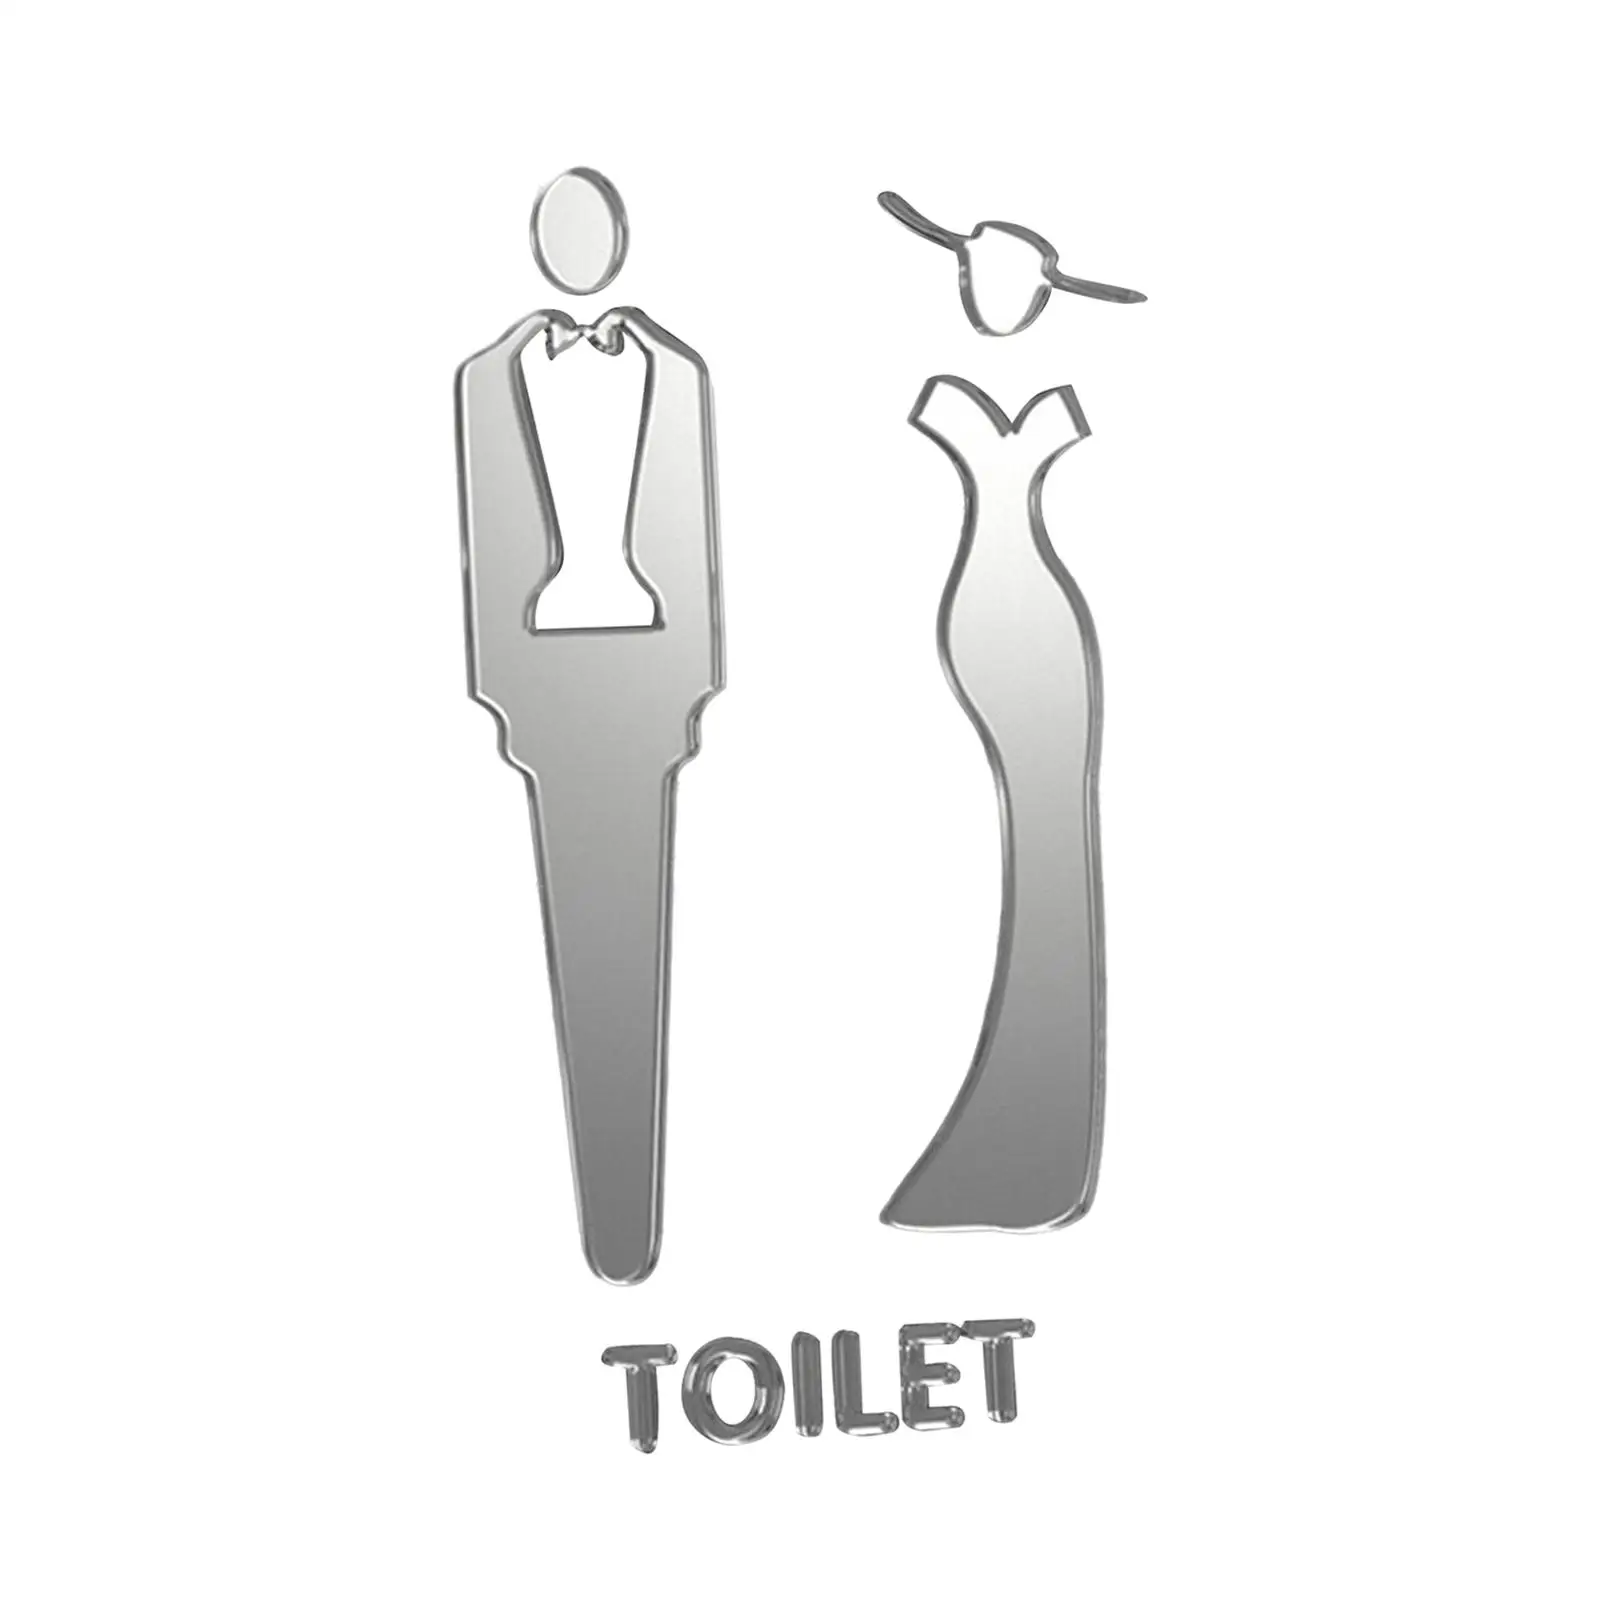 Male and Female Bathroom Door Signage Unisex Acrylic Symbols for Commercial